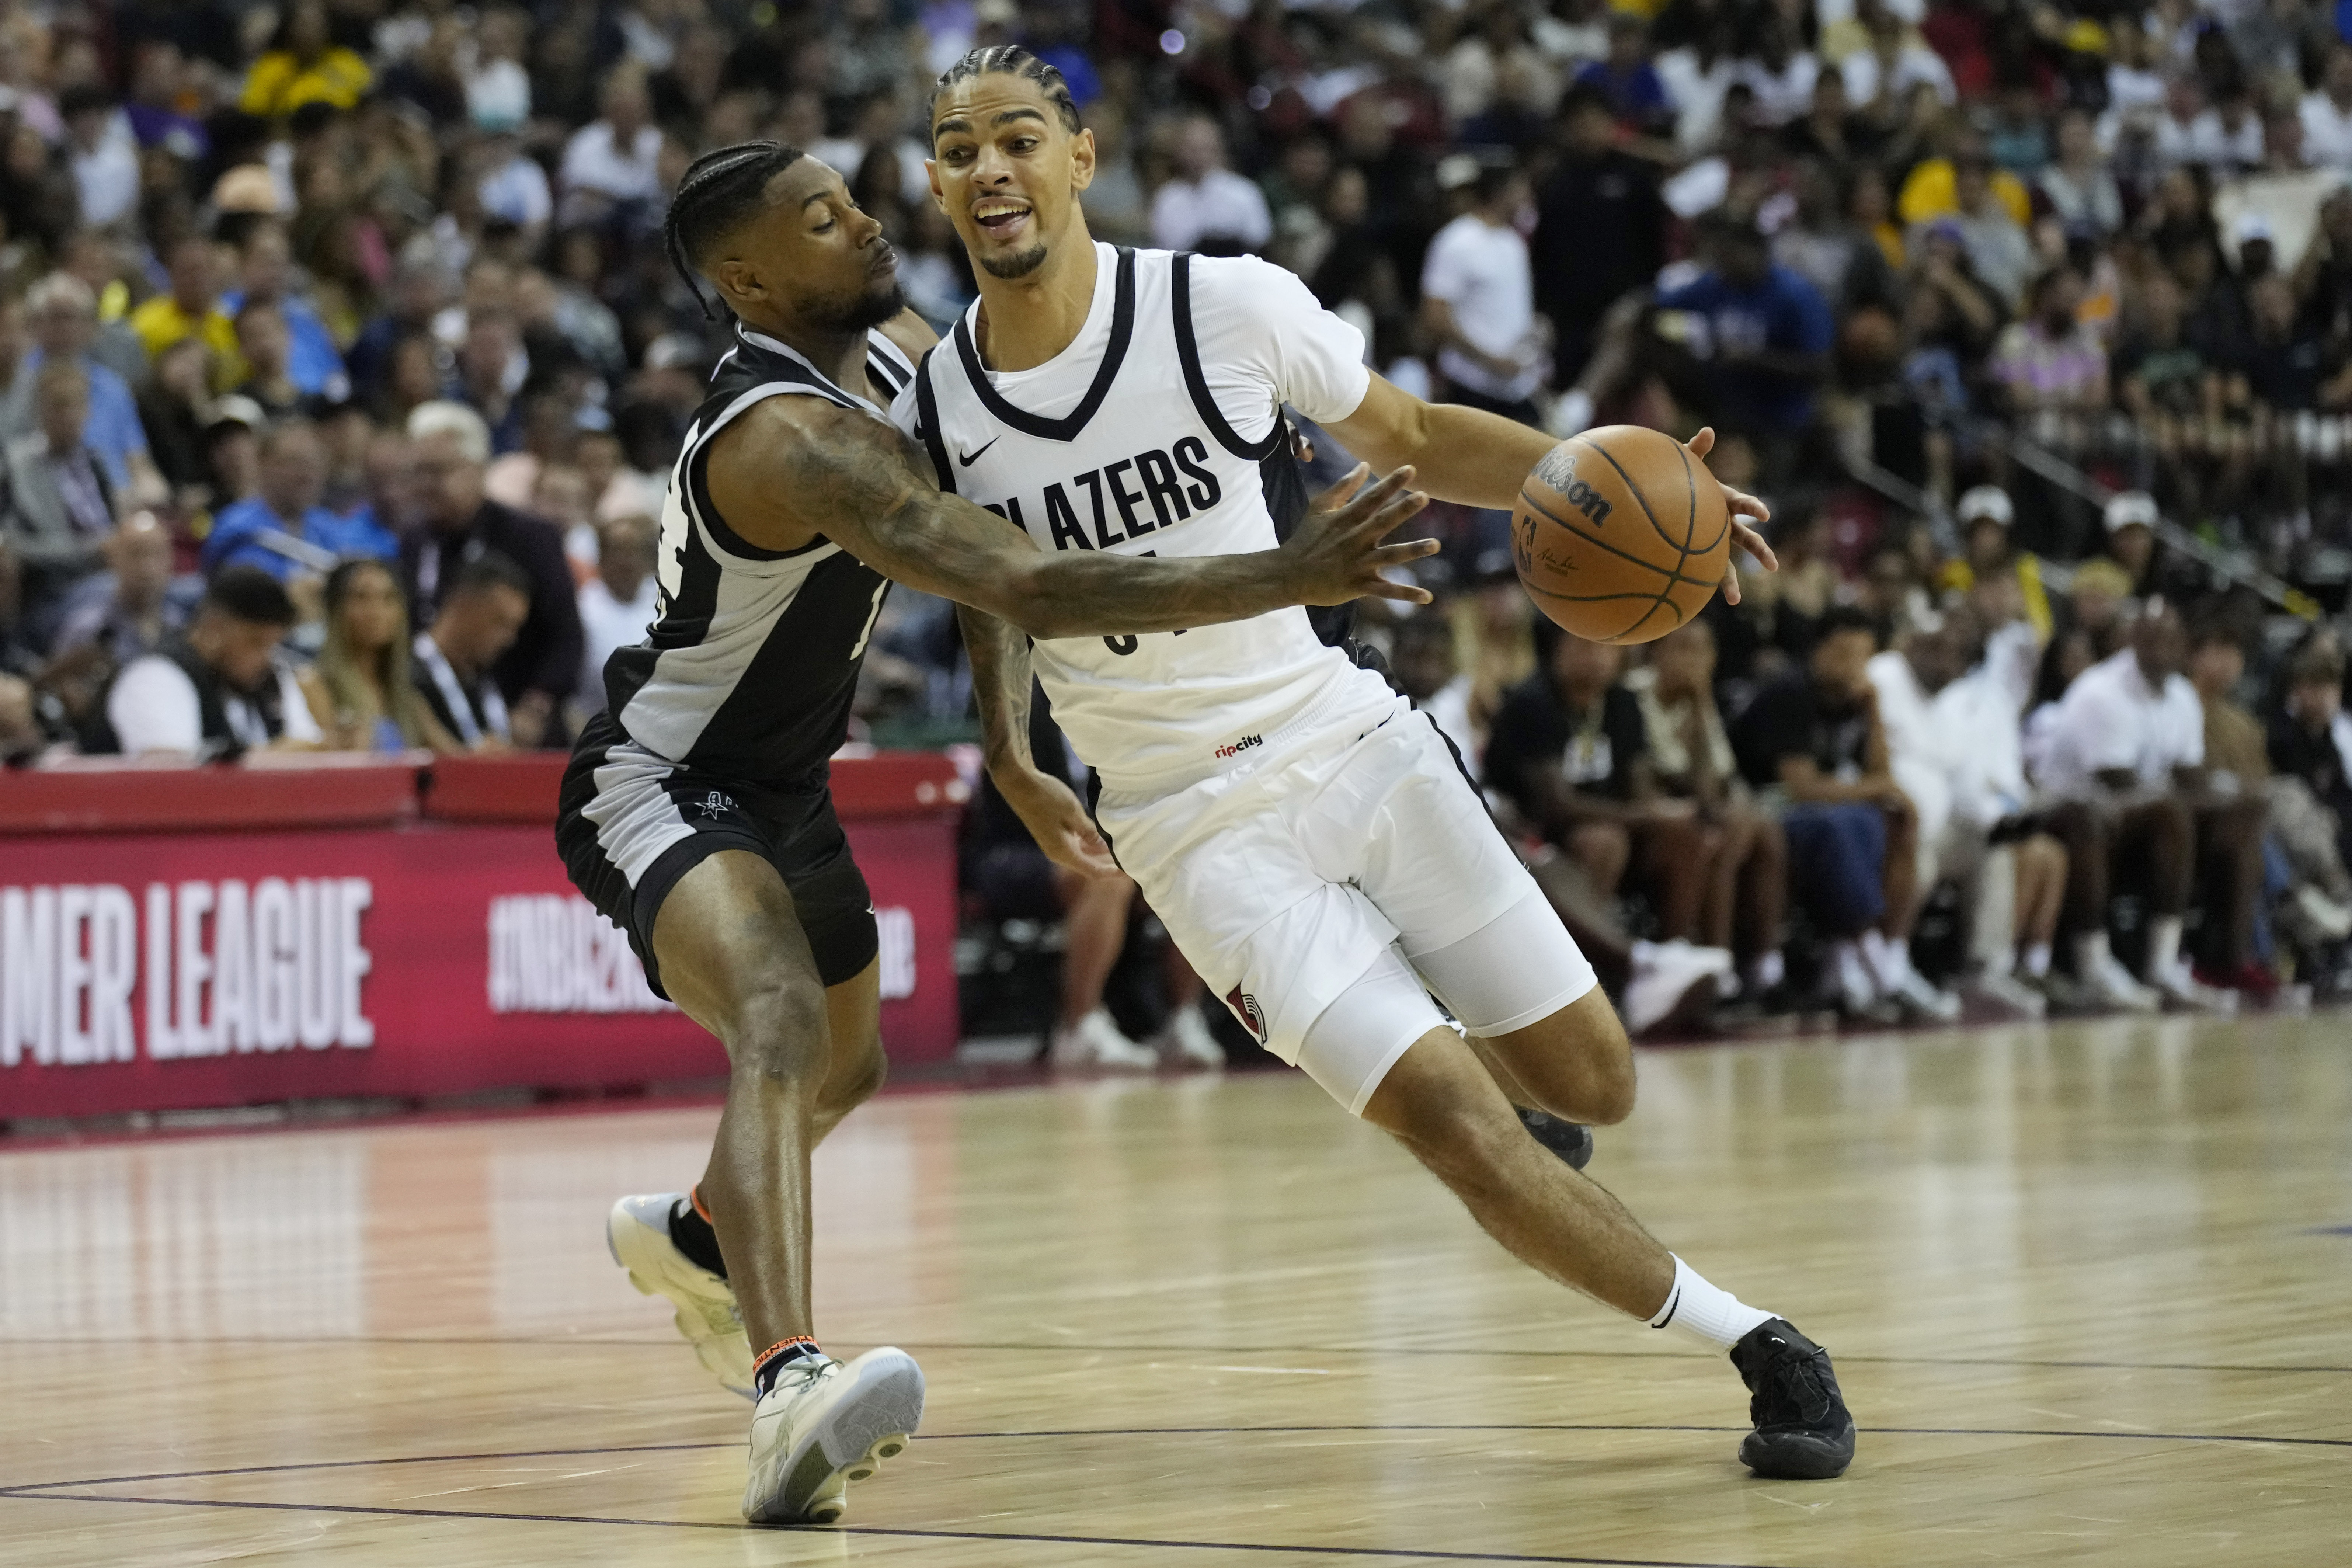 Kenneth Lofton Jr. among top undrafted players to play in summer league